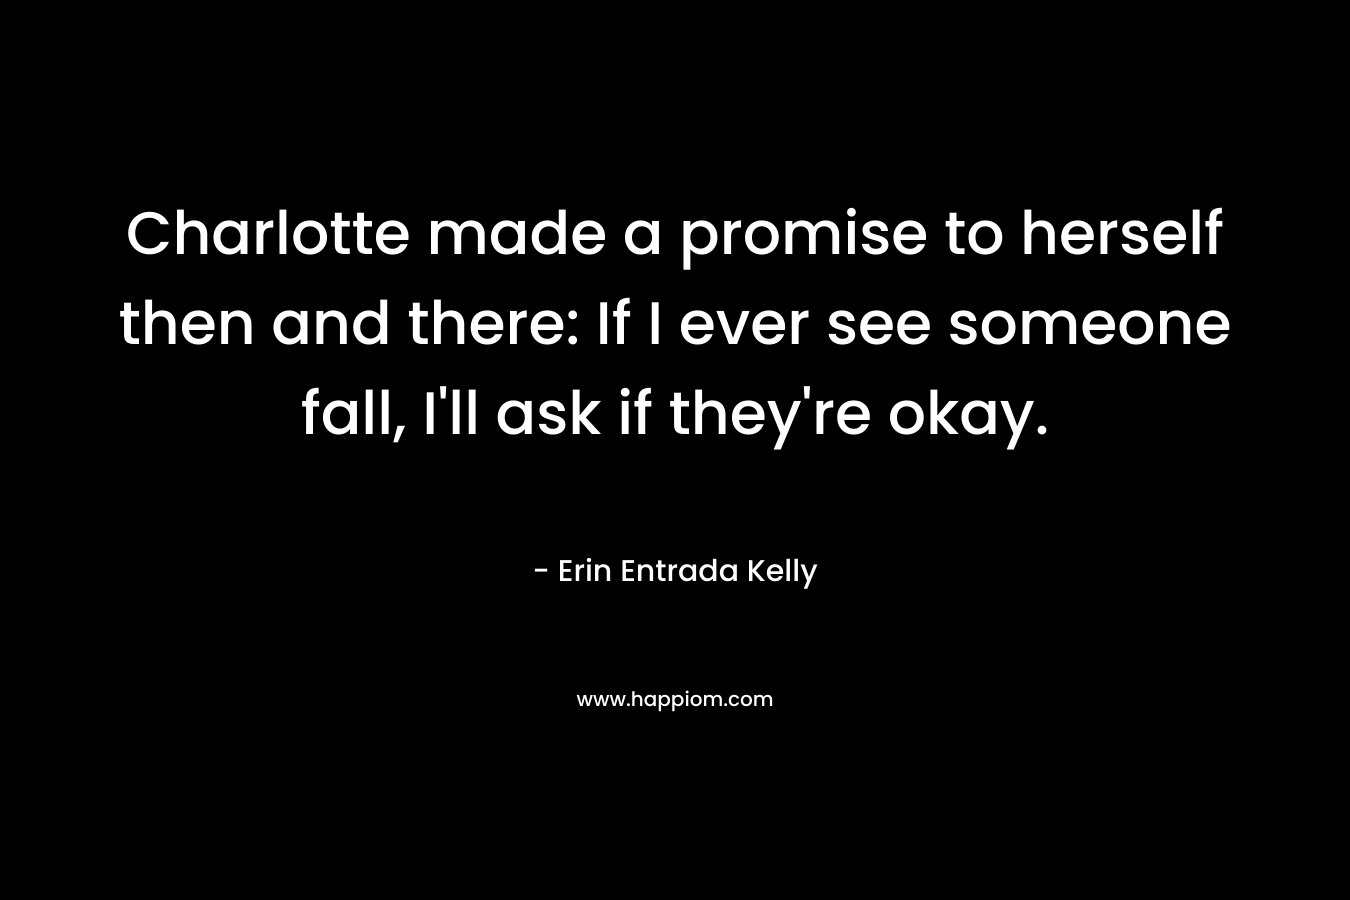 Charlotte made a promise to herself then and there: If I ever see someone fall, I'll ask if they're okay.